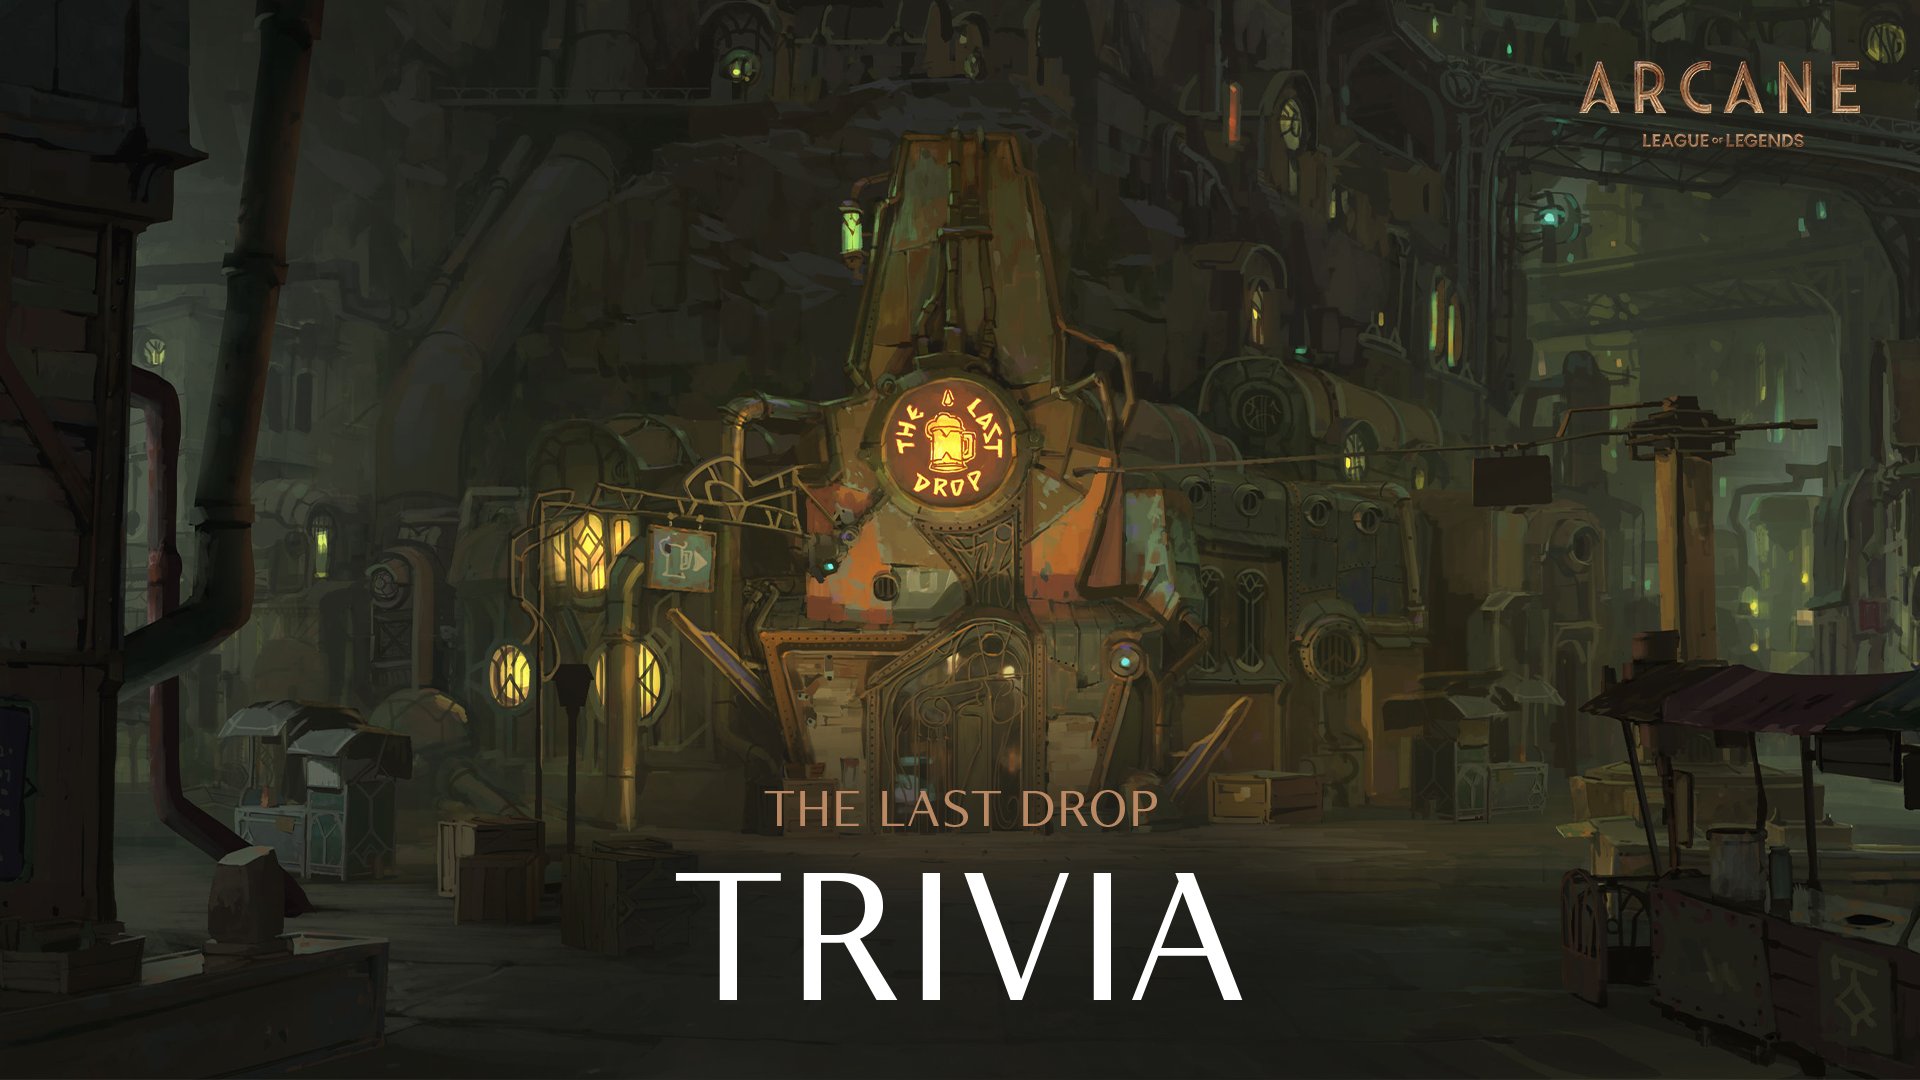 Arcane would be proud. You're all worthy of the Academy. Trivia Answers Revealed: 1 of the Undercity 2 3 4 of Gold 5 #Arcane